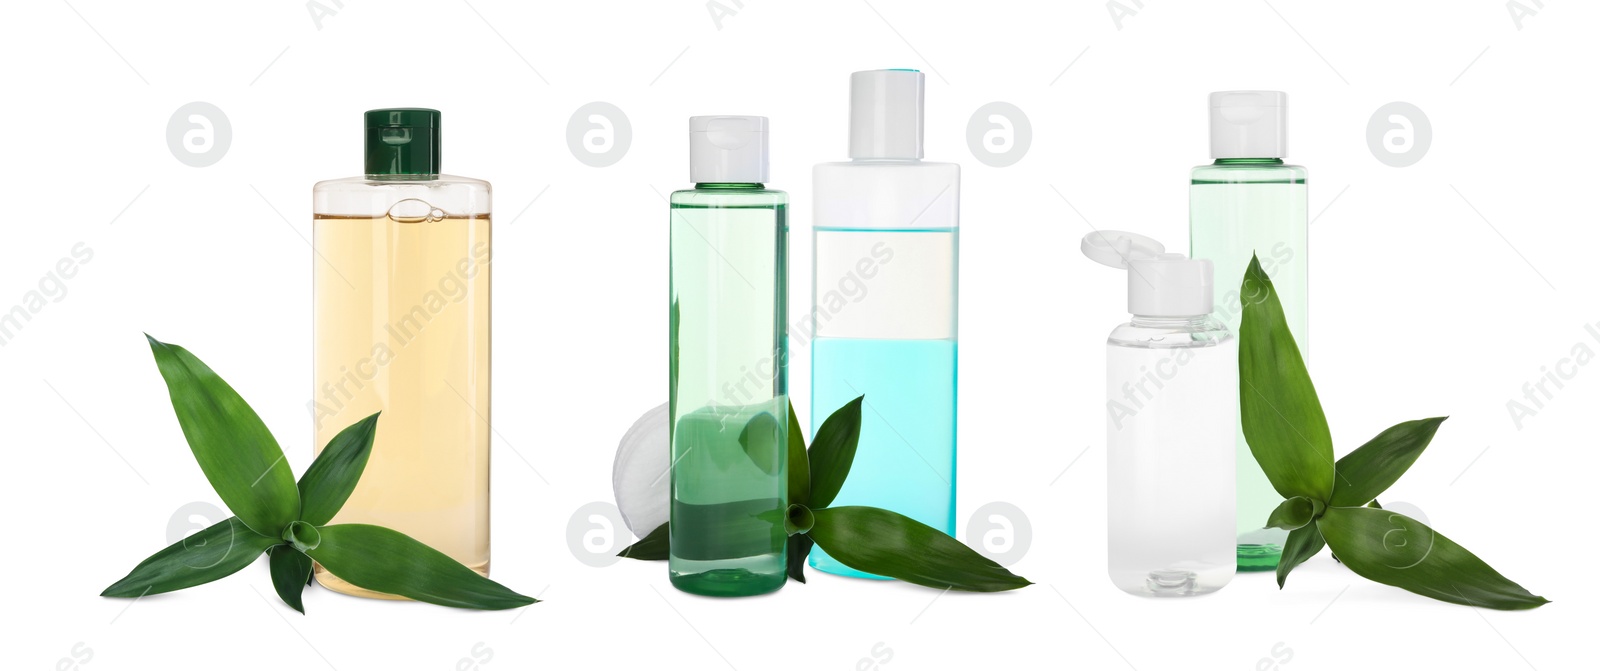 Image of Set with bottles of micellar cleansing water and green leaves on white background